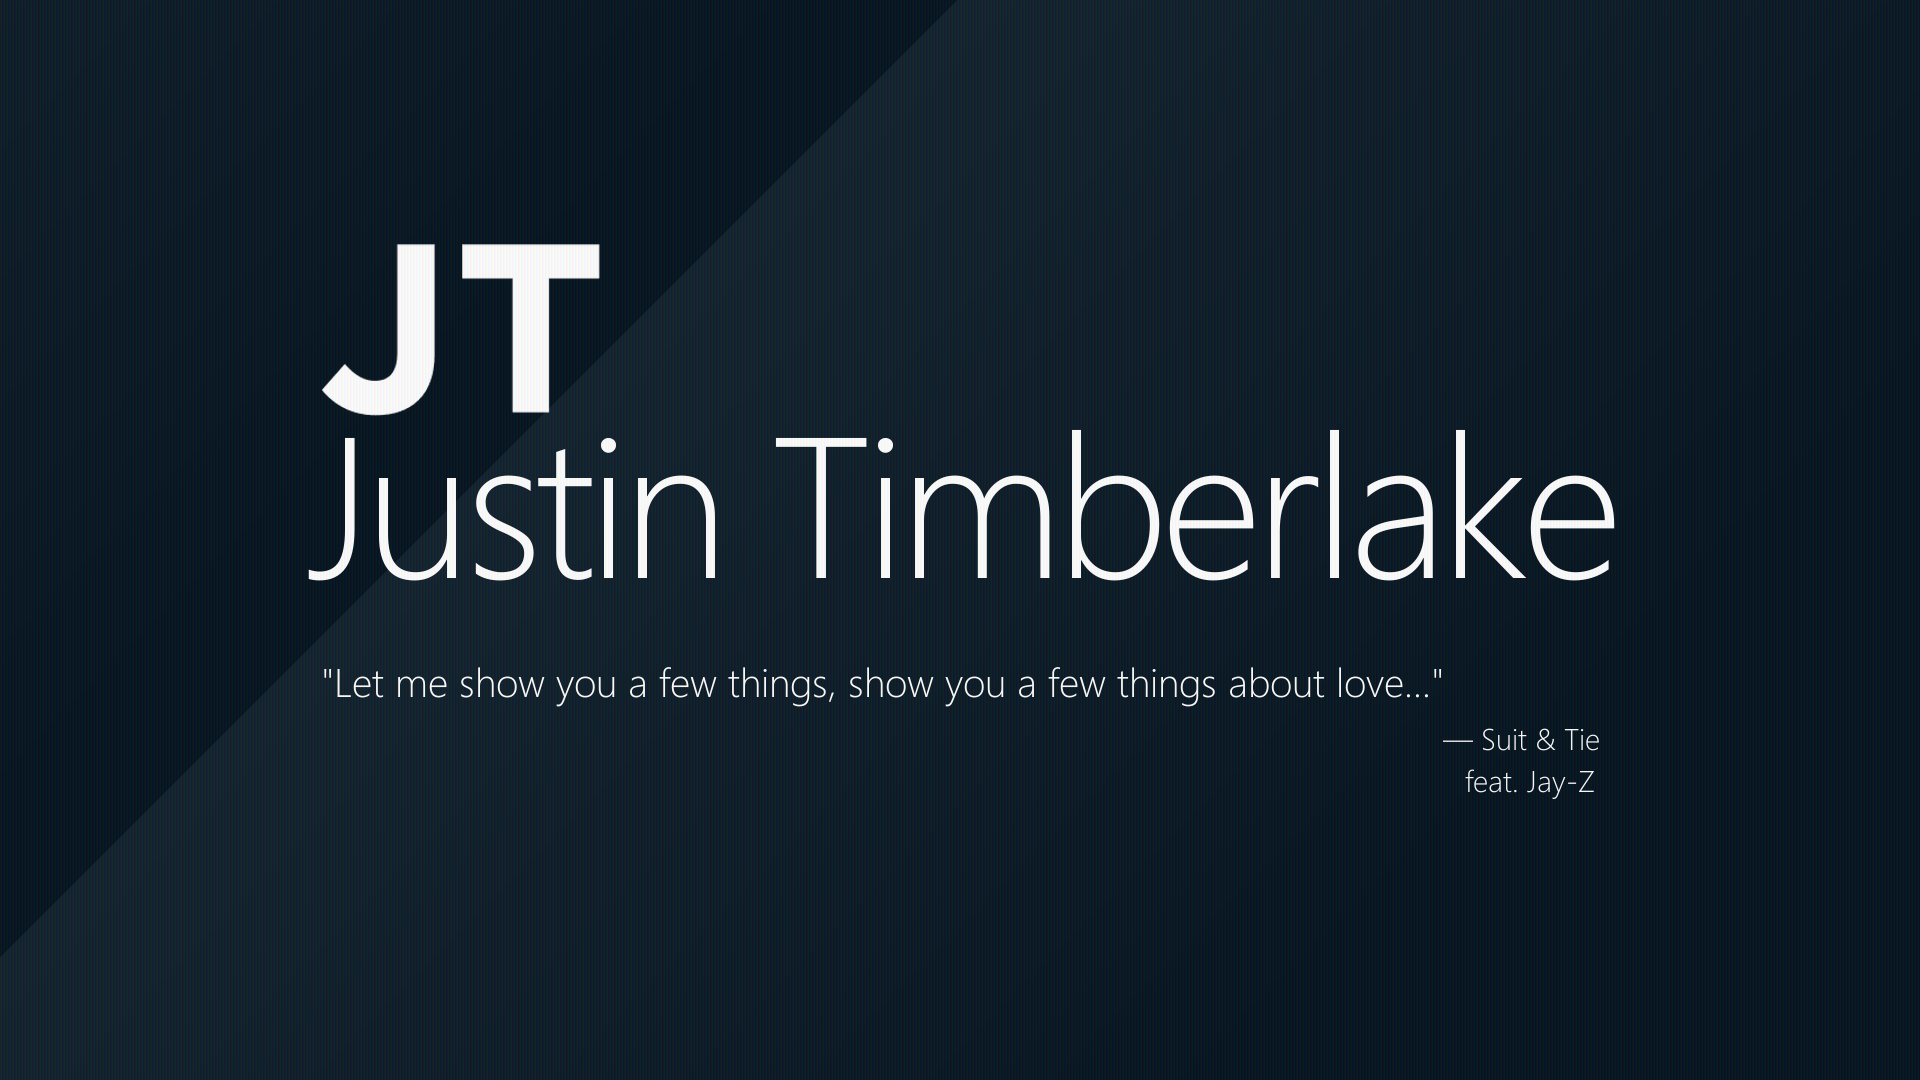 Justin Timberlake/Jay-Z - Suit and Tie | Windows 8